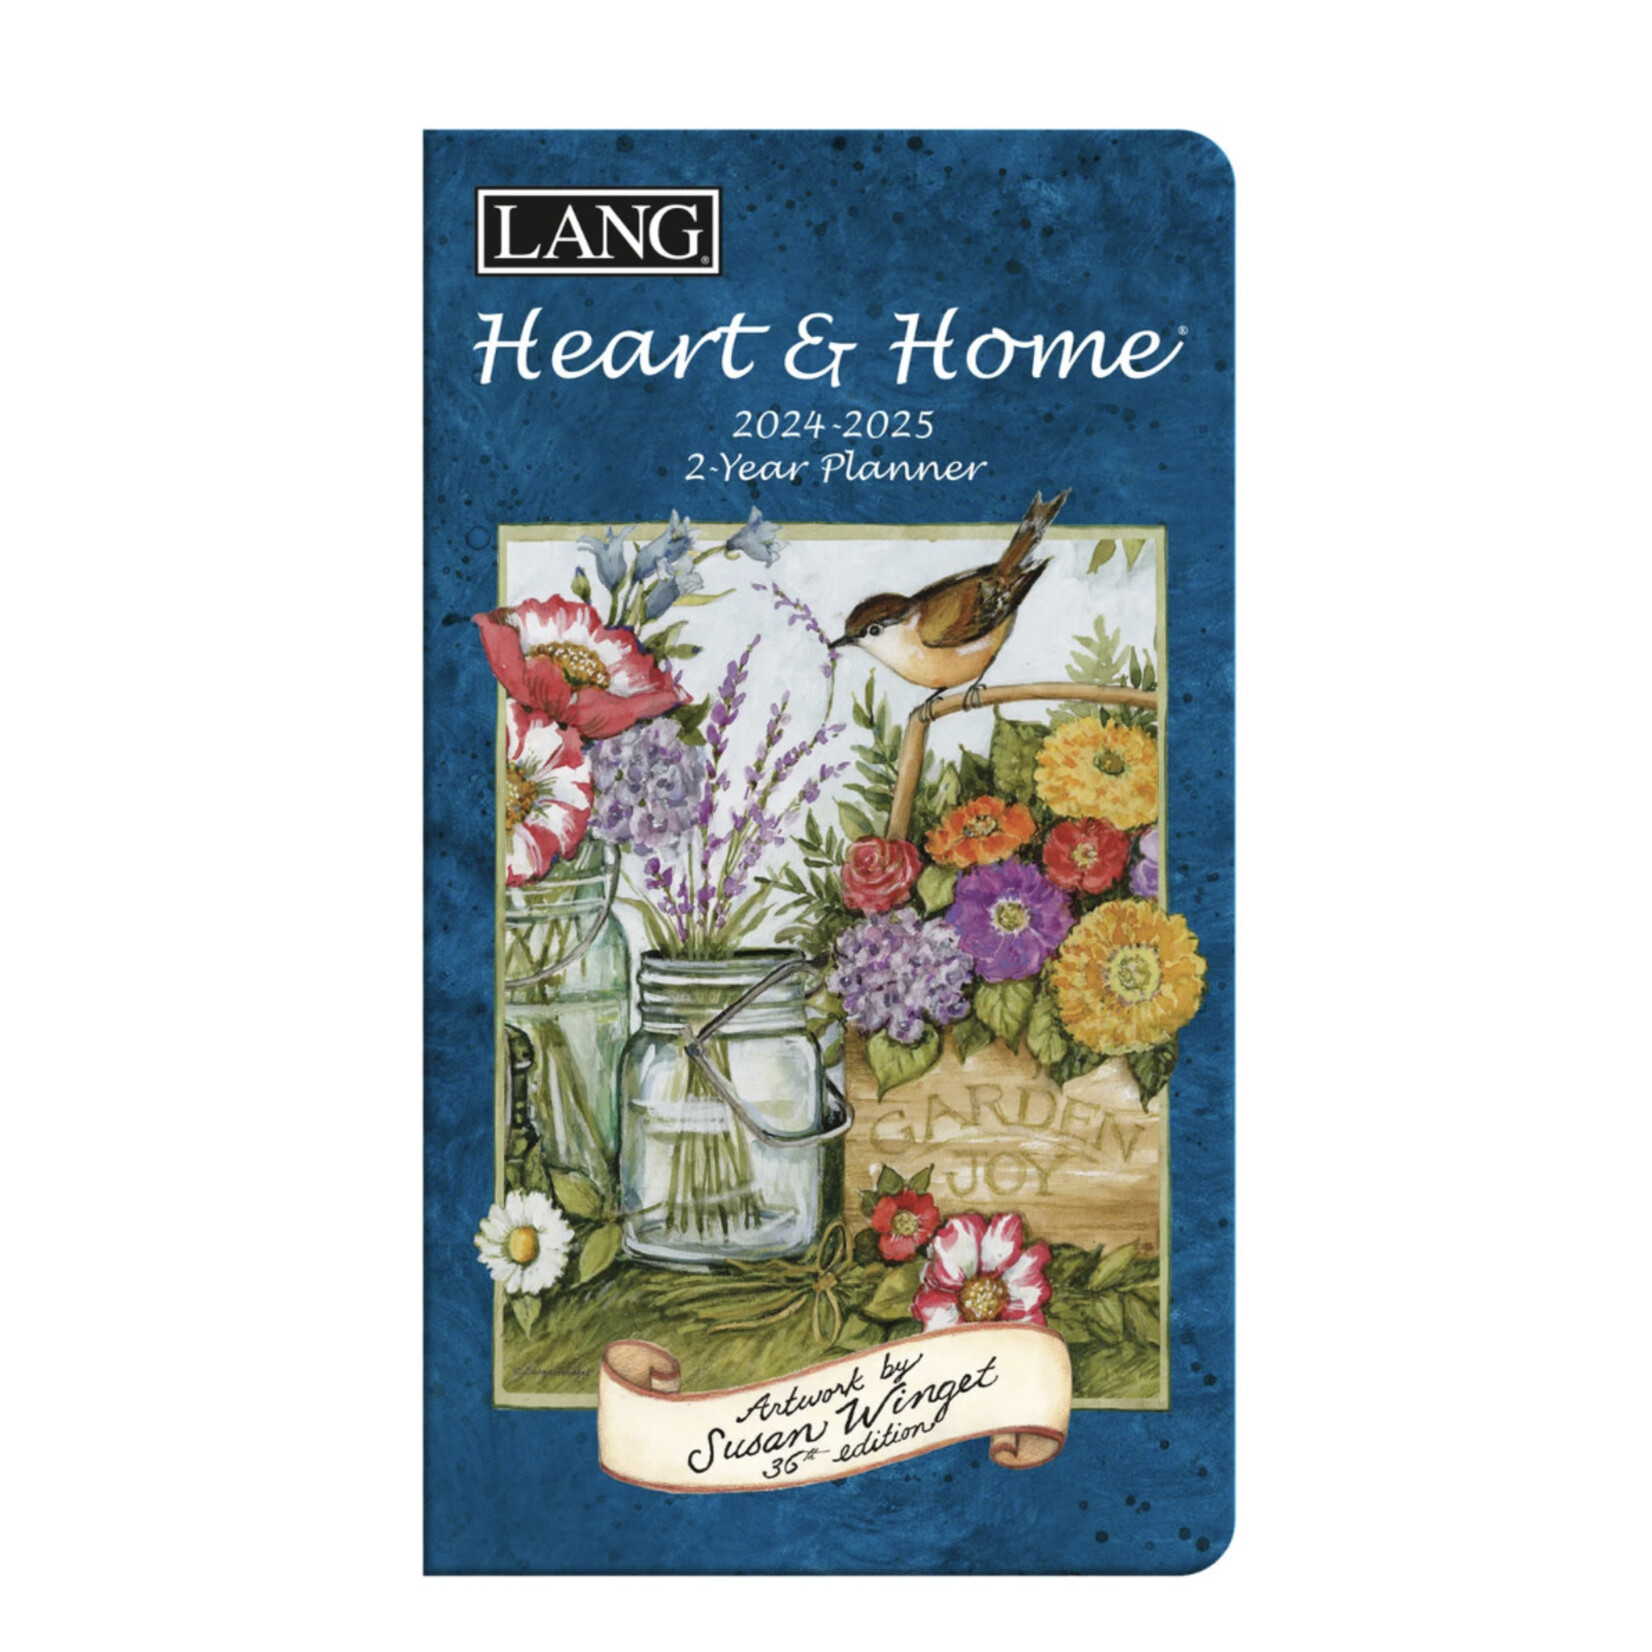 Lang Heart & Home 2 Year Planner 2024-2025